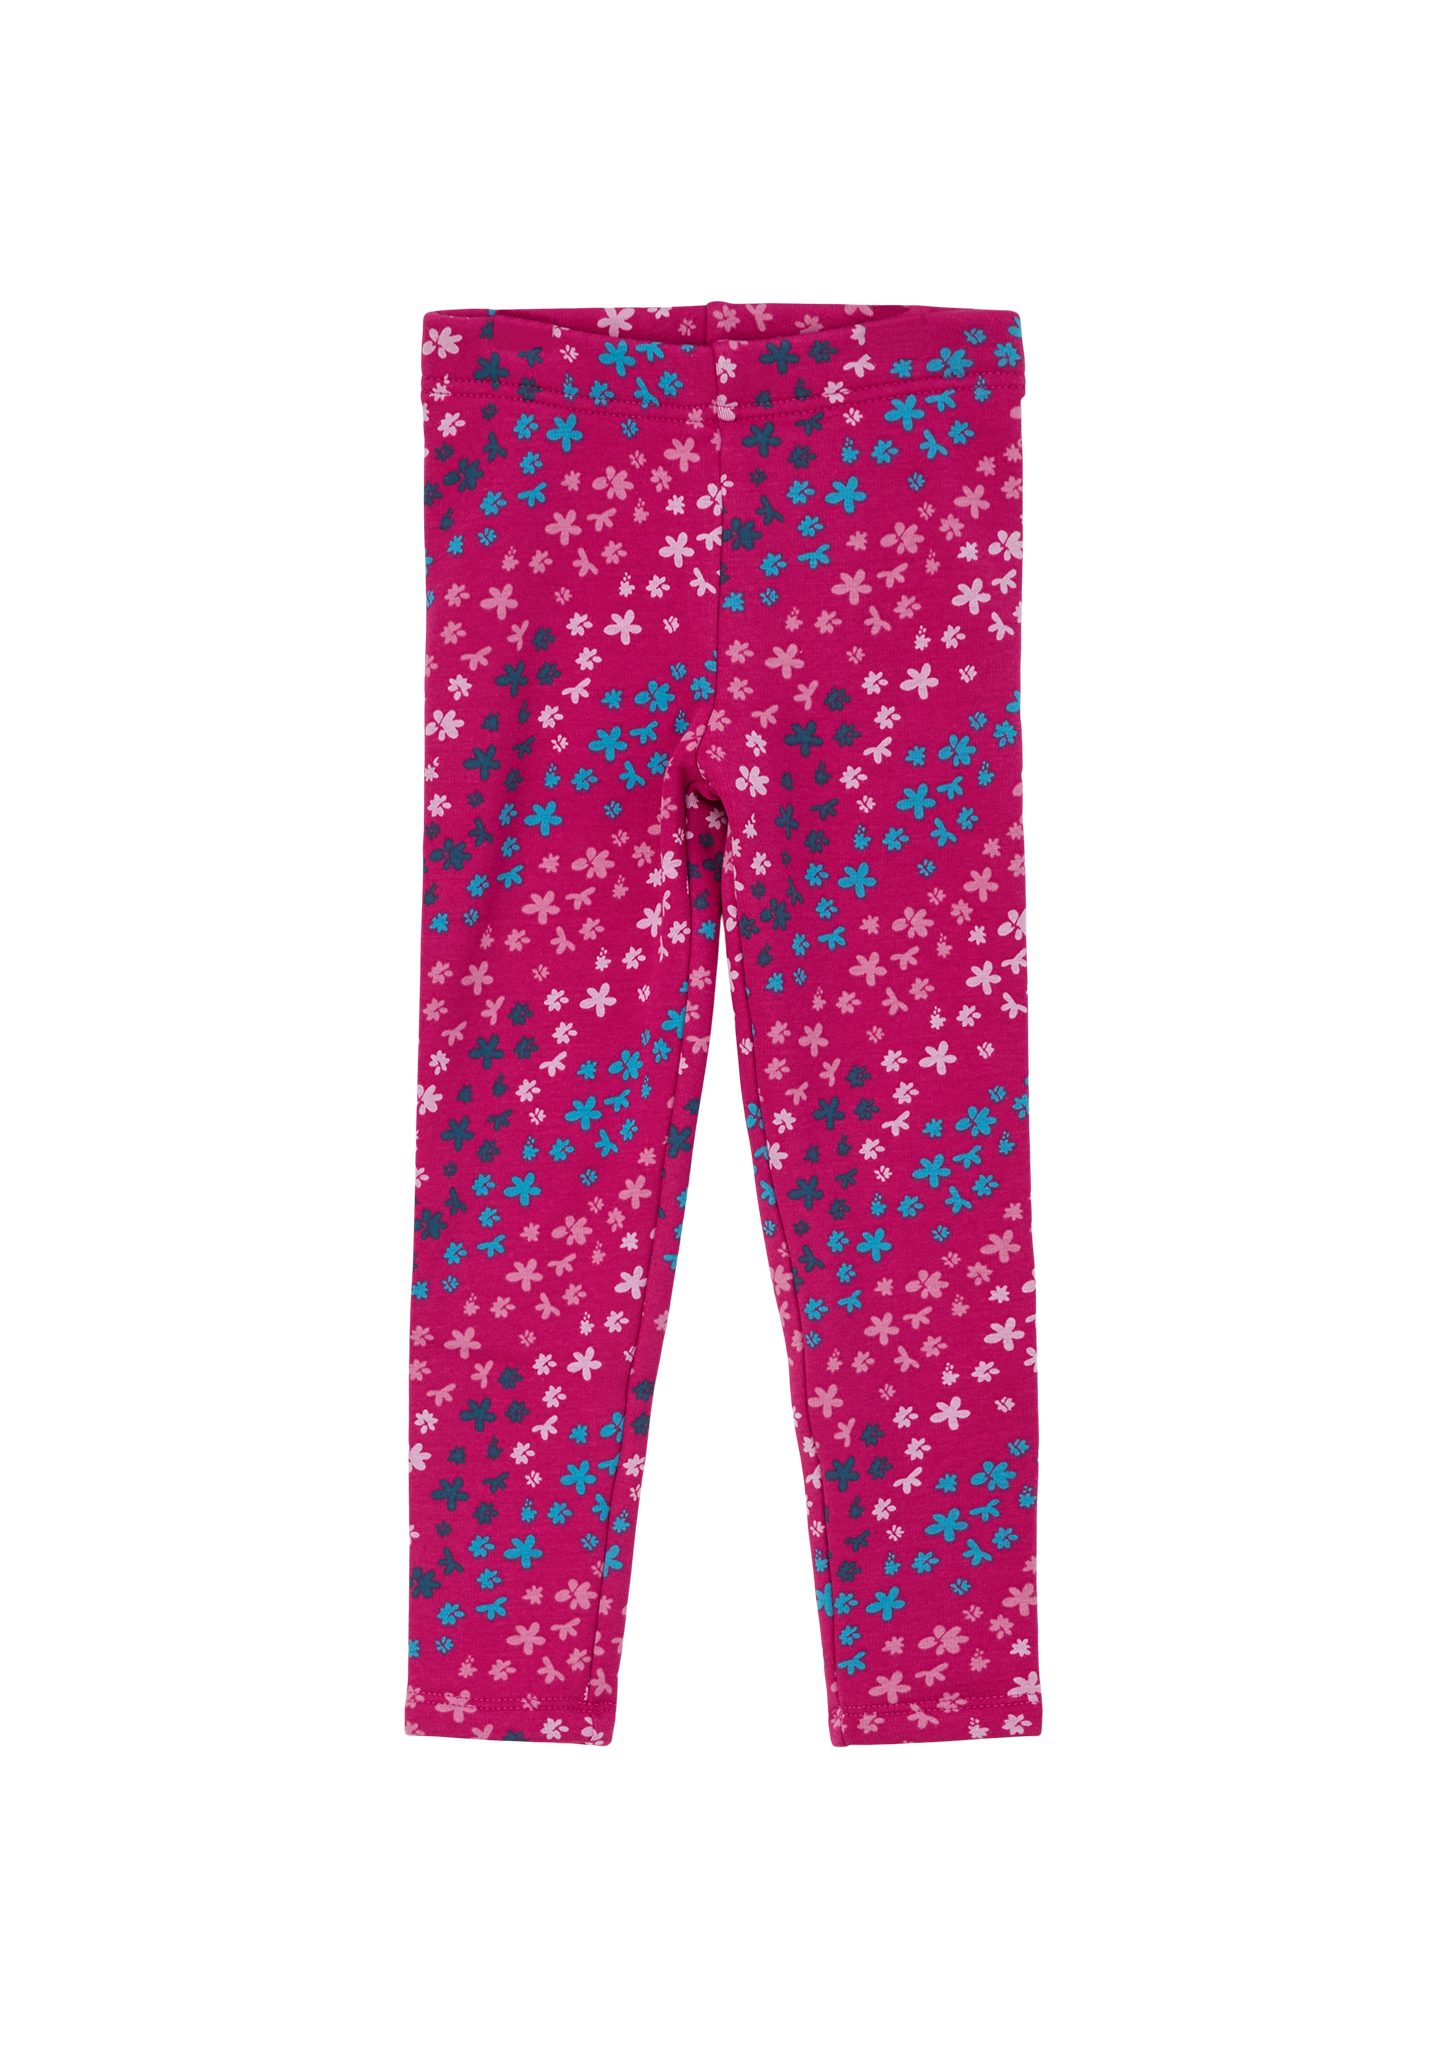 Thermofleece-Futter Leggings Leggings pink s.Oliver mit